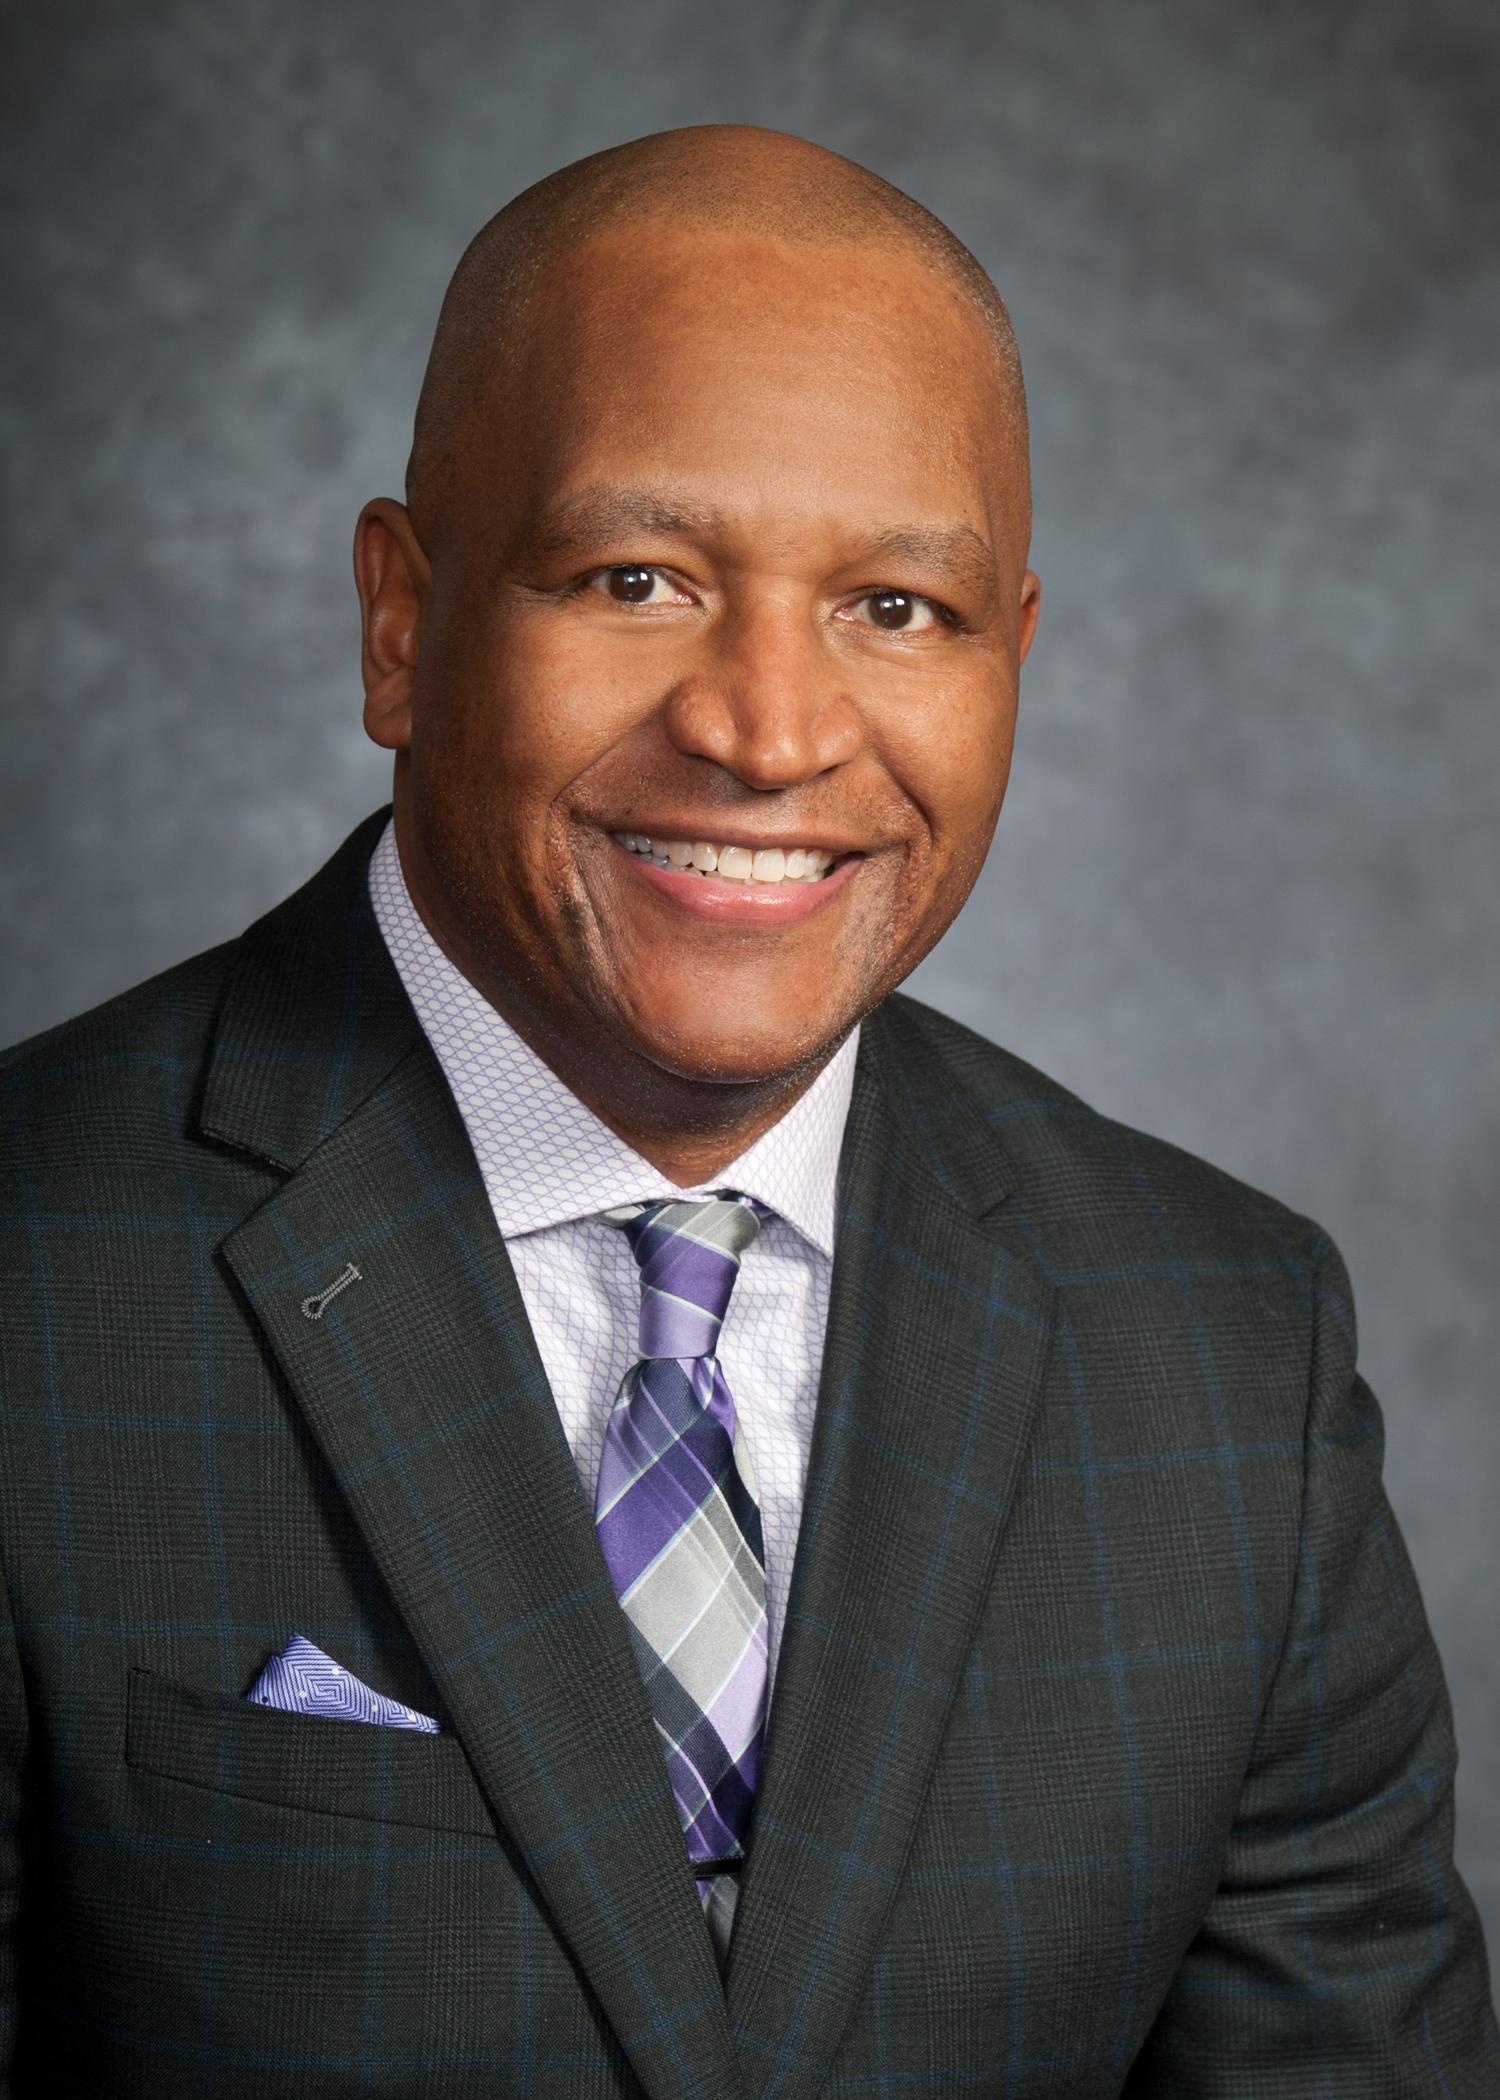 Gregory L. King, president of the University of Mount Union